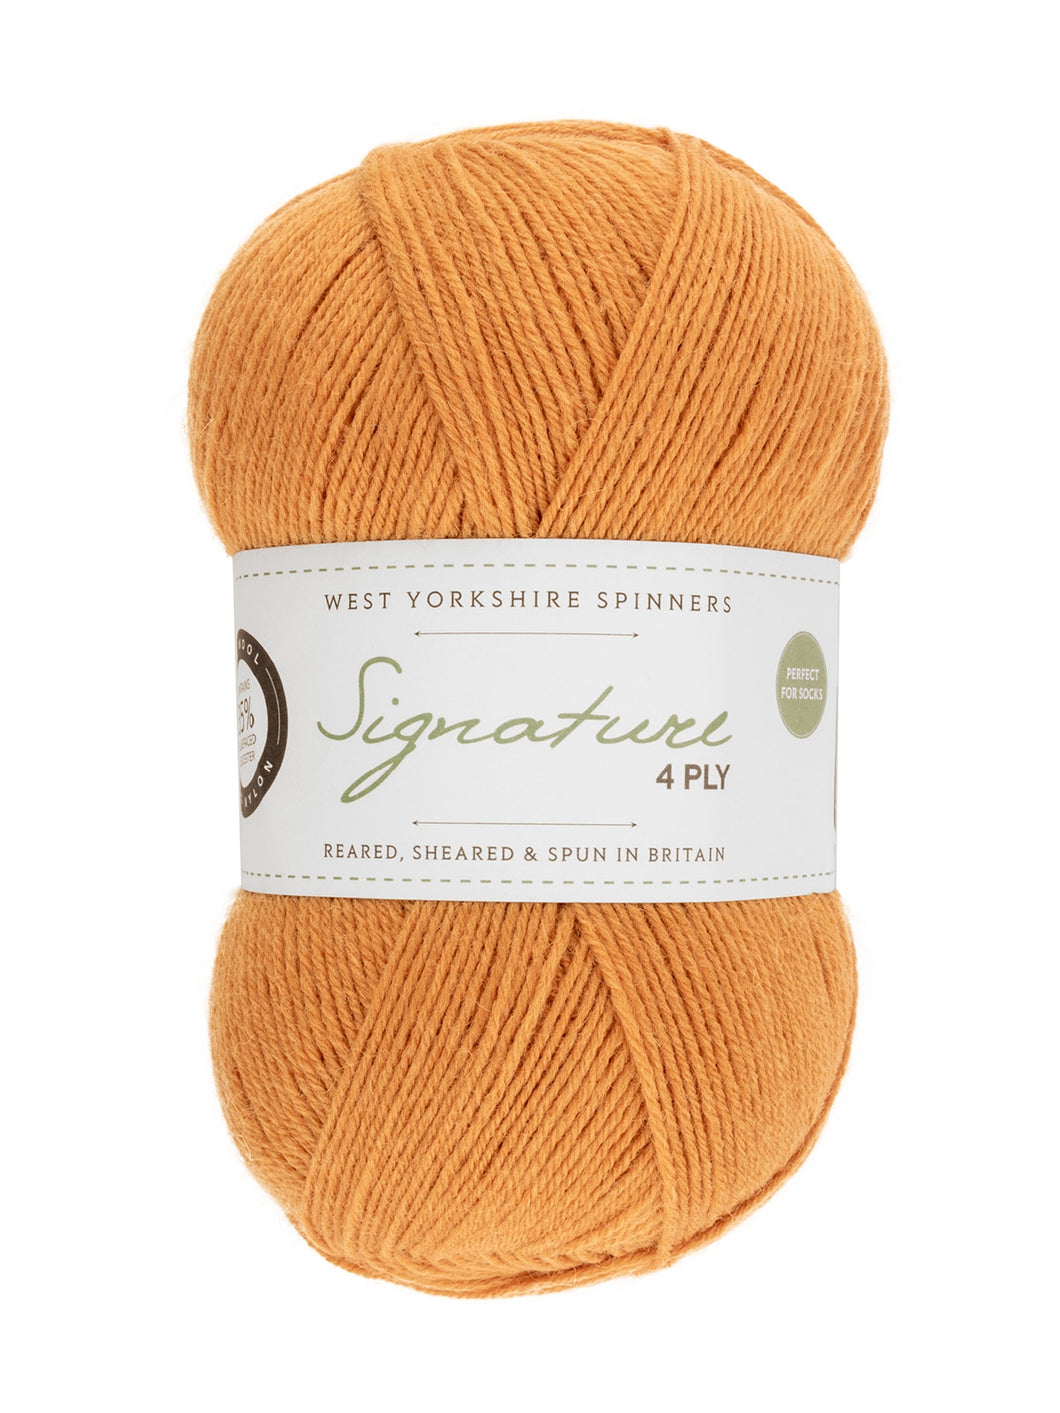 West Yorkshire Spinners - Signature 4 Ply Solids